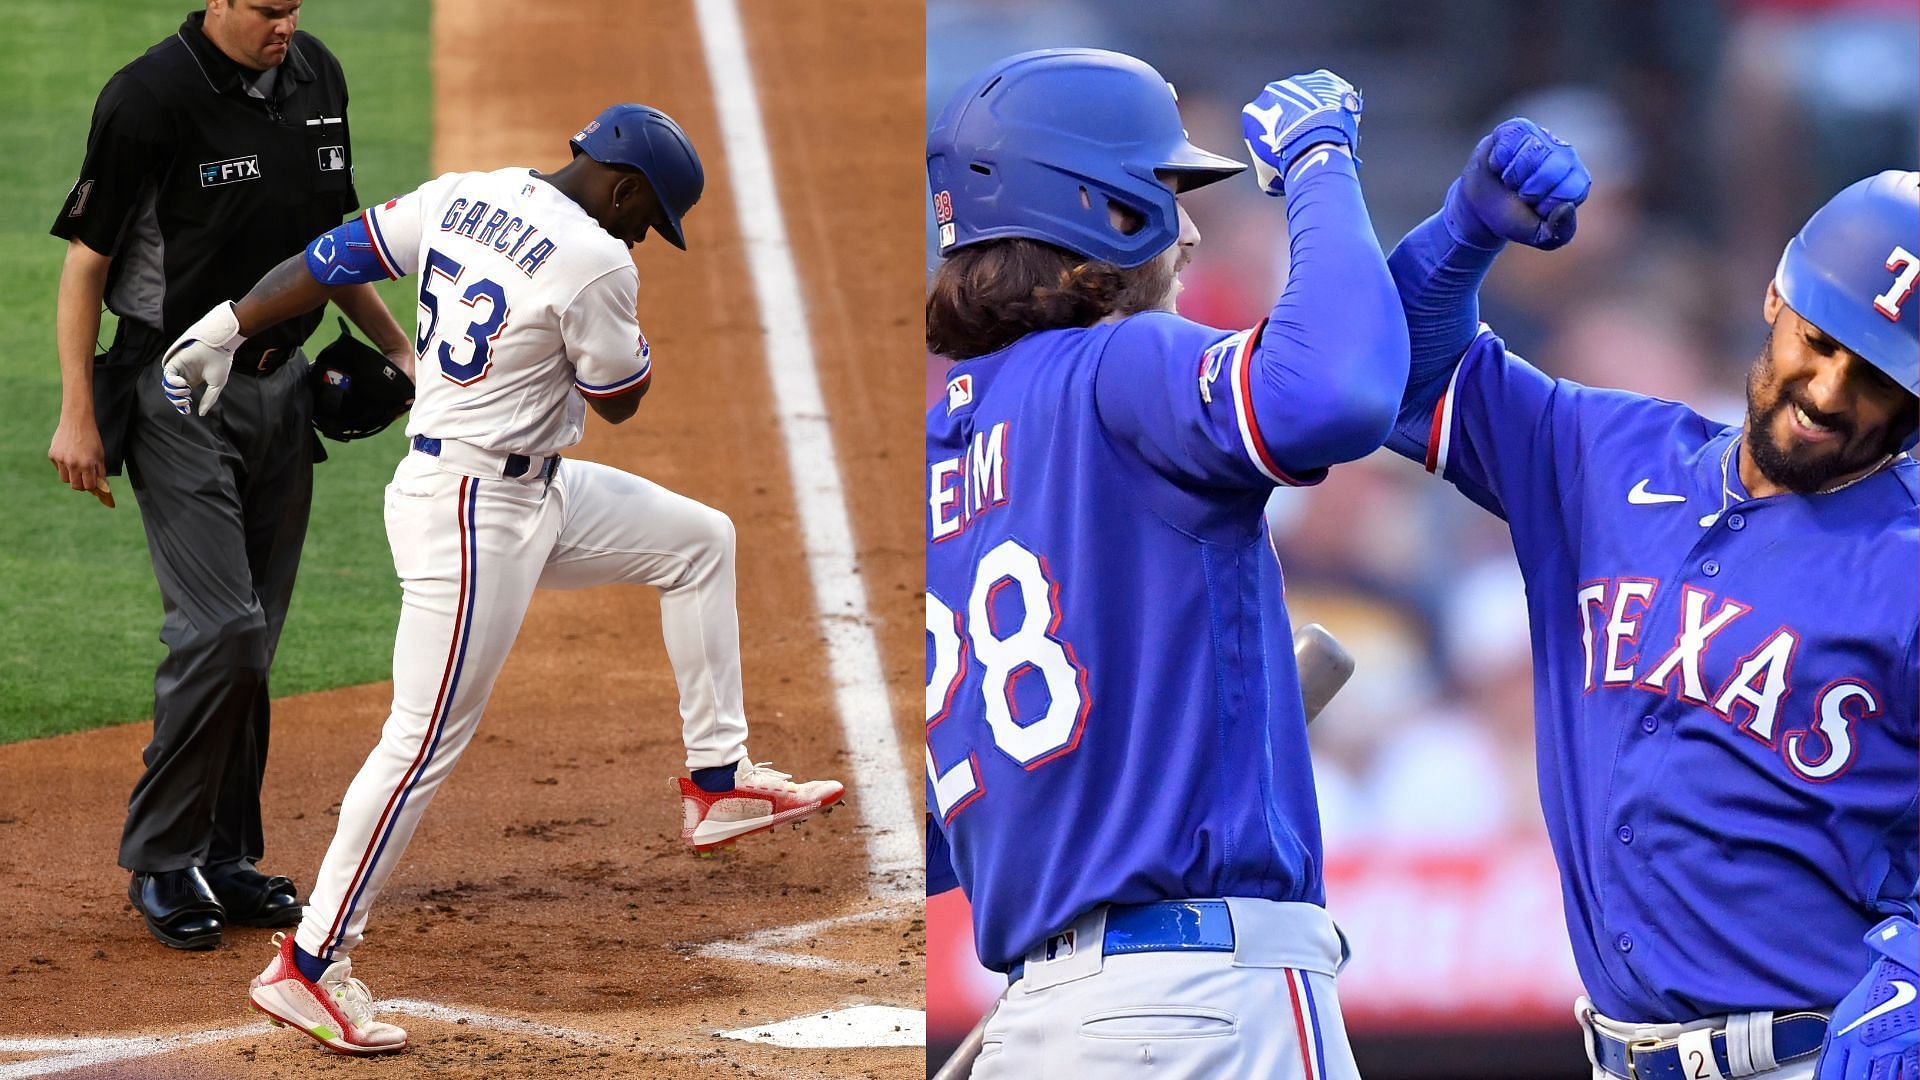 The Texas Rangers have a shot at their first-ever World Series